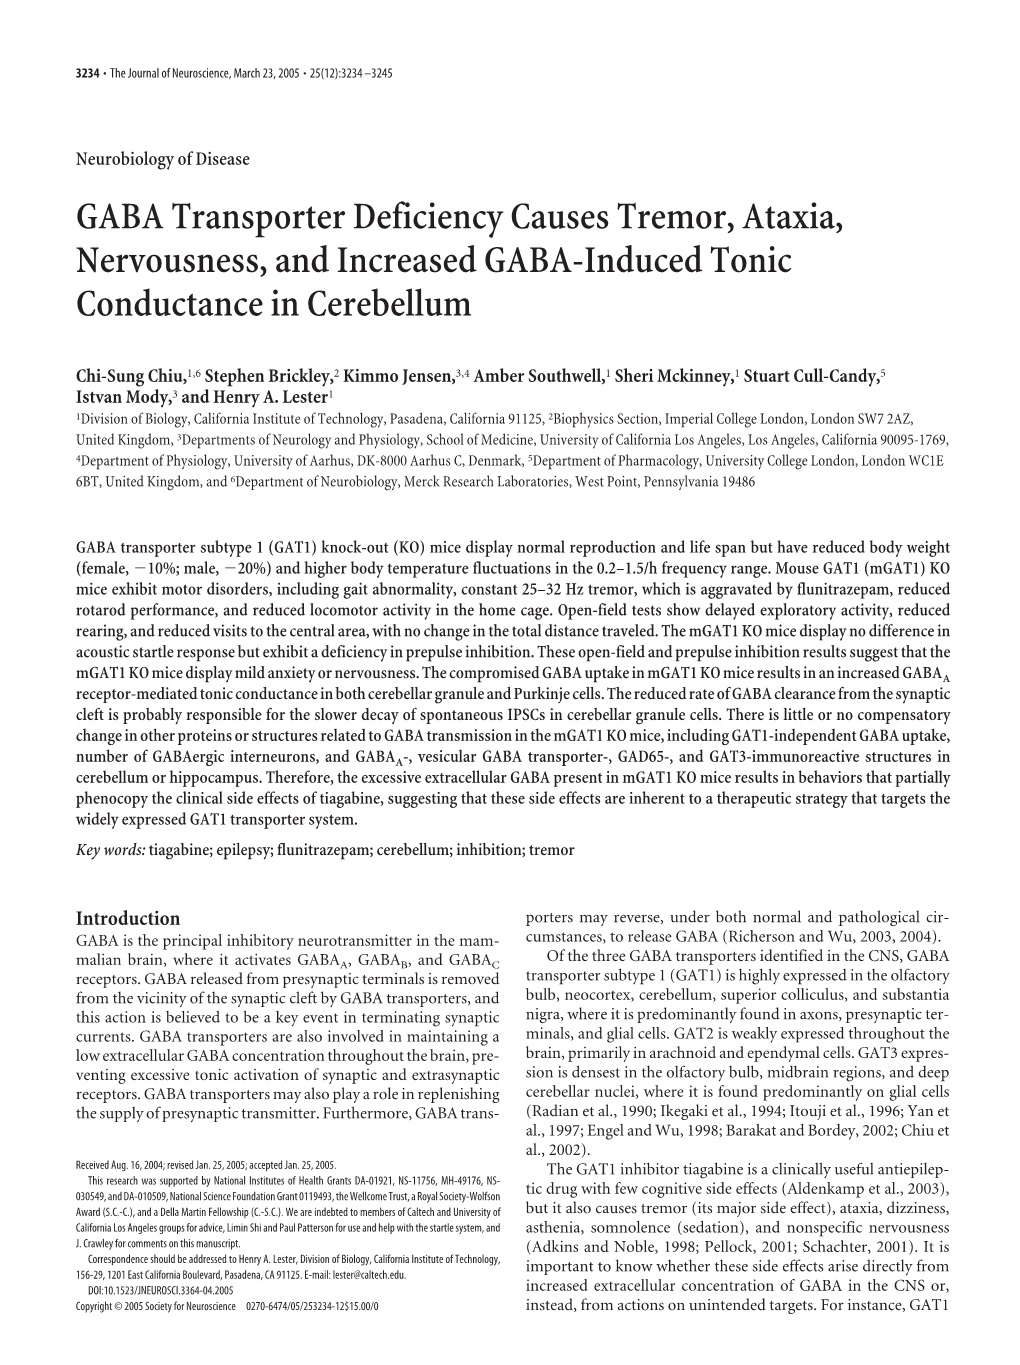 GABA Transporter Deficiency Causes Tremor, Ataxia, Nervousness, and Increased GABA-Induced Tonic Conductance in Cerebellum